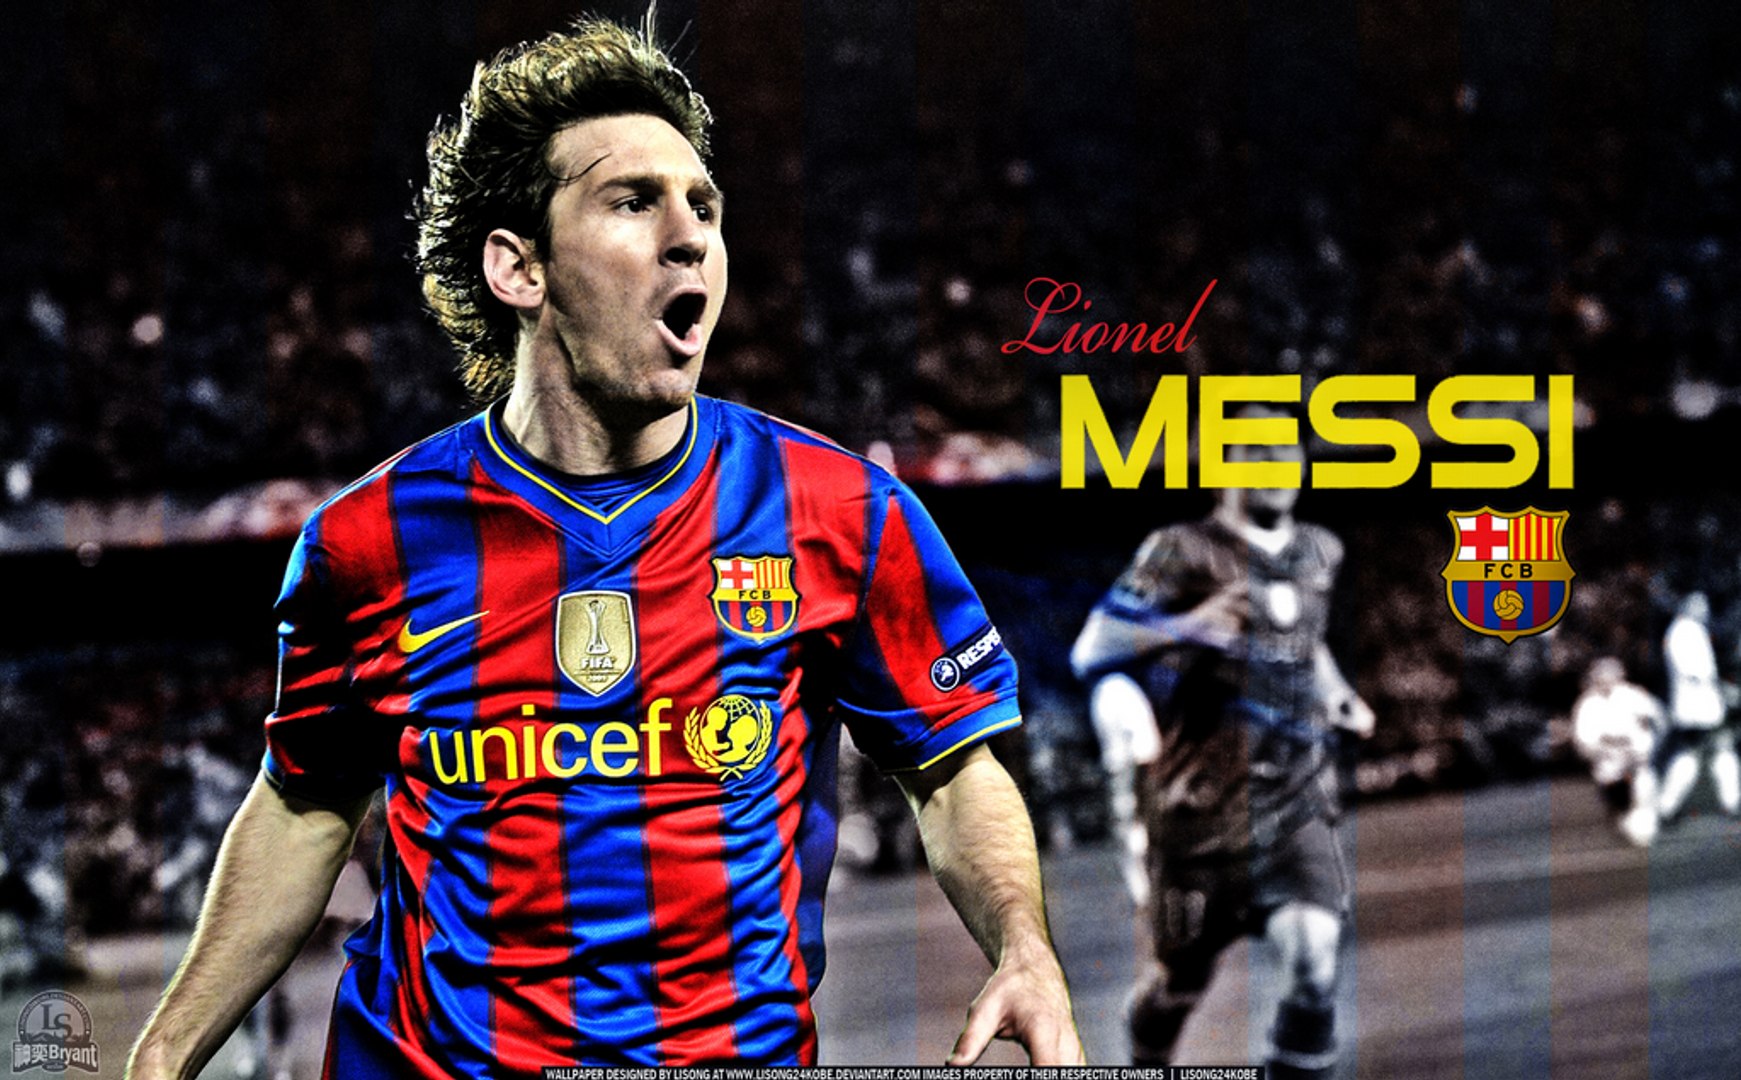 Lionel messi â the king of dribbling ii â